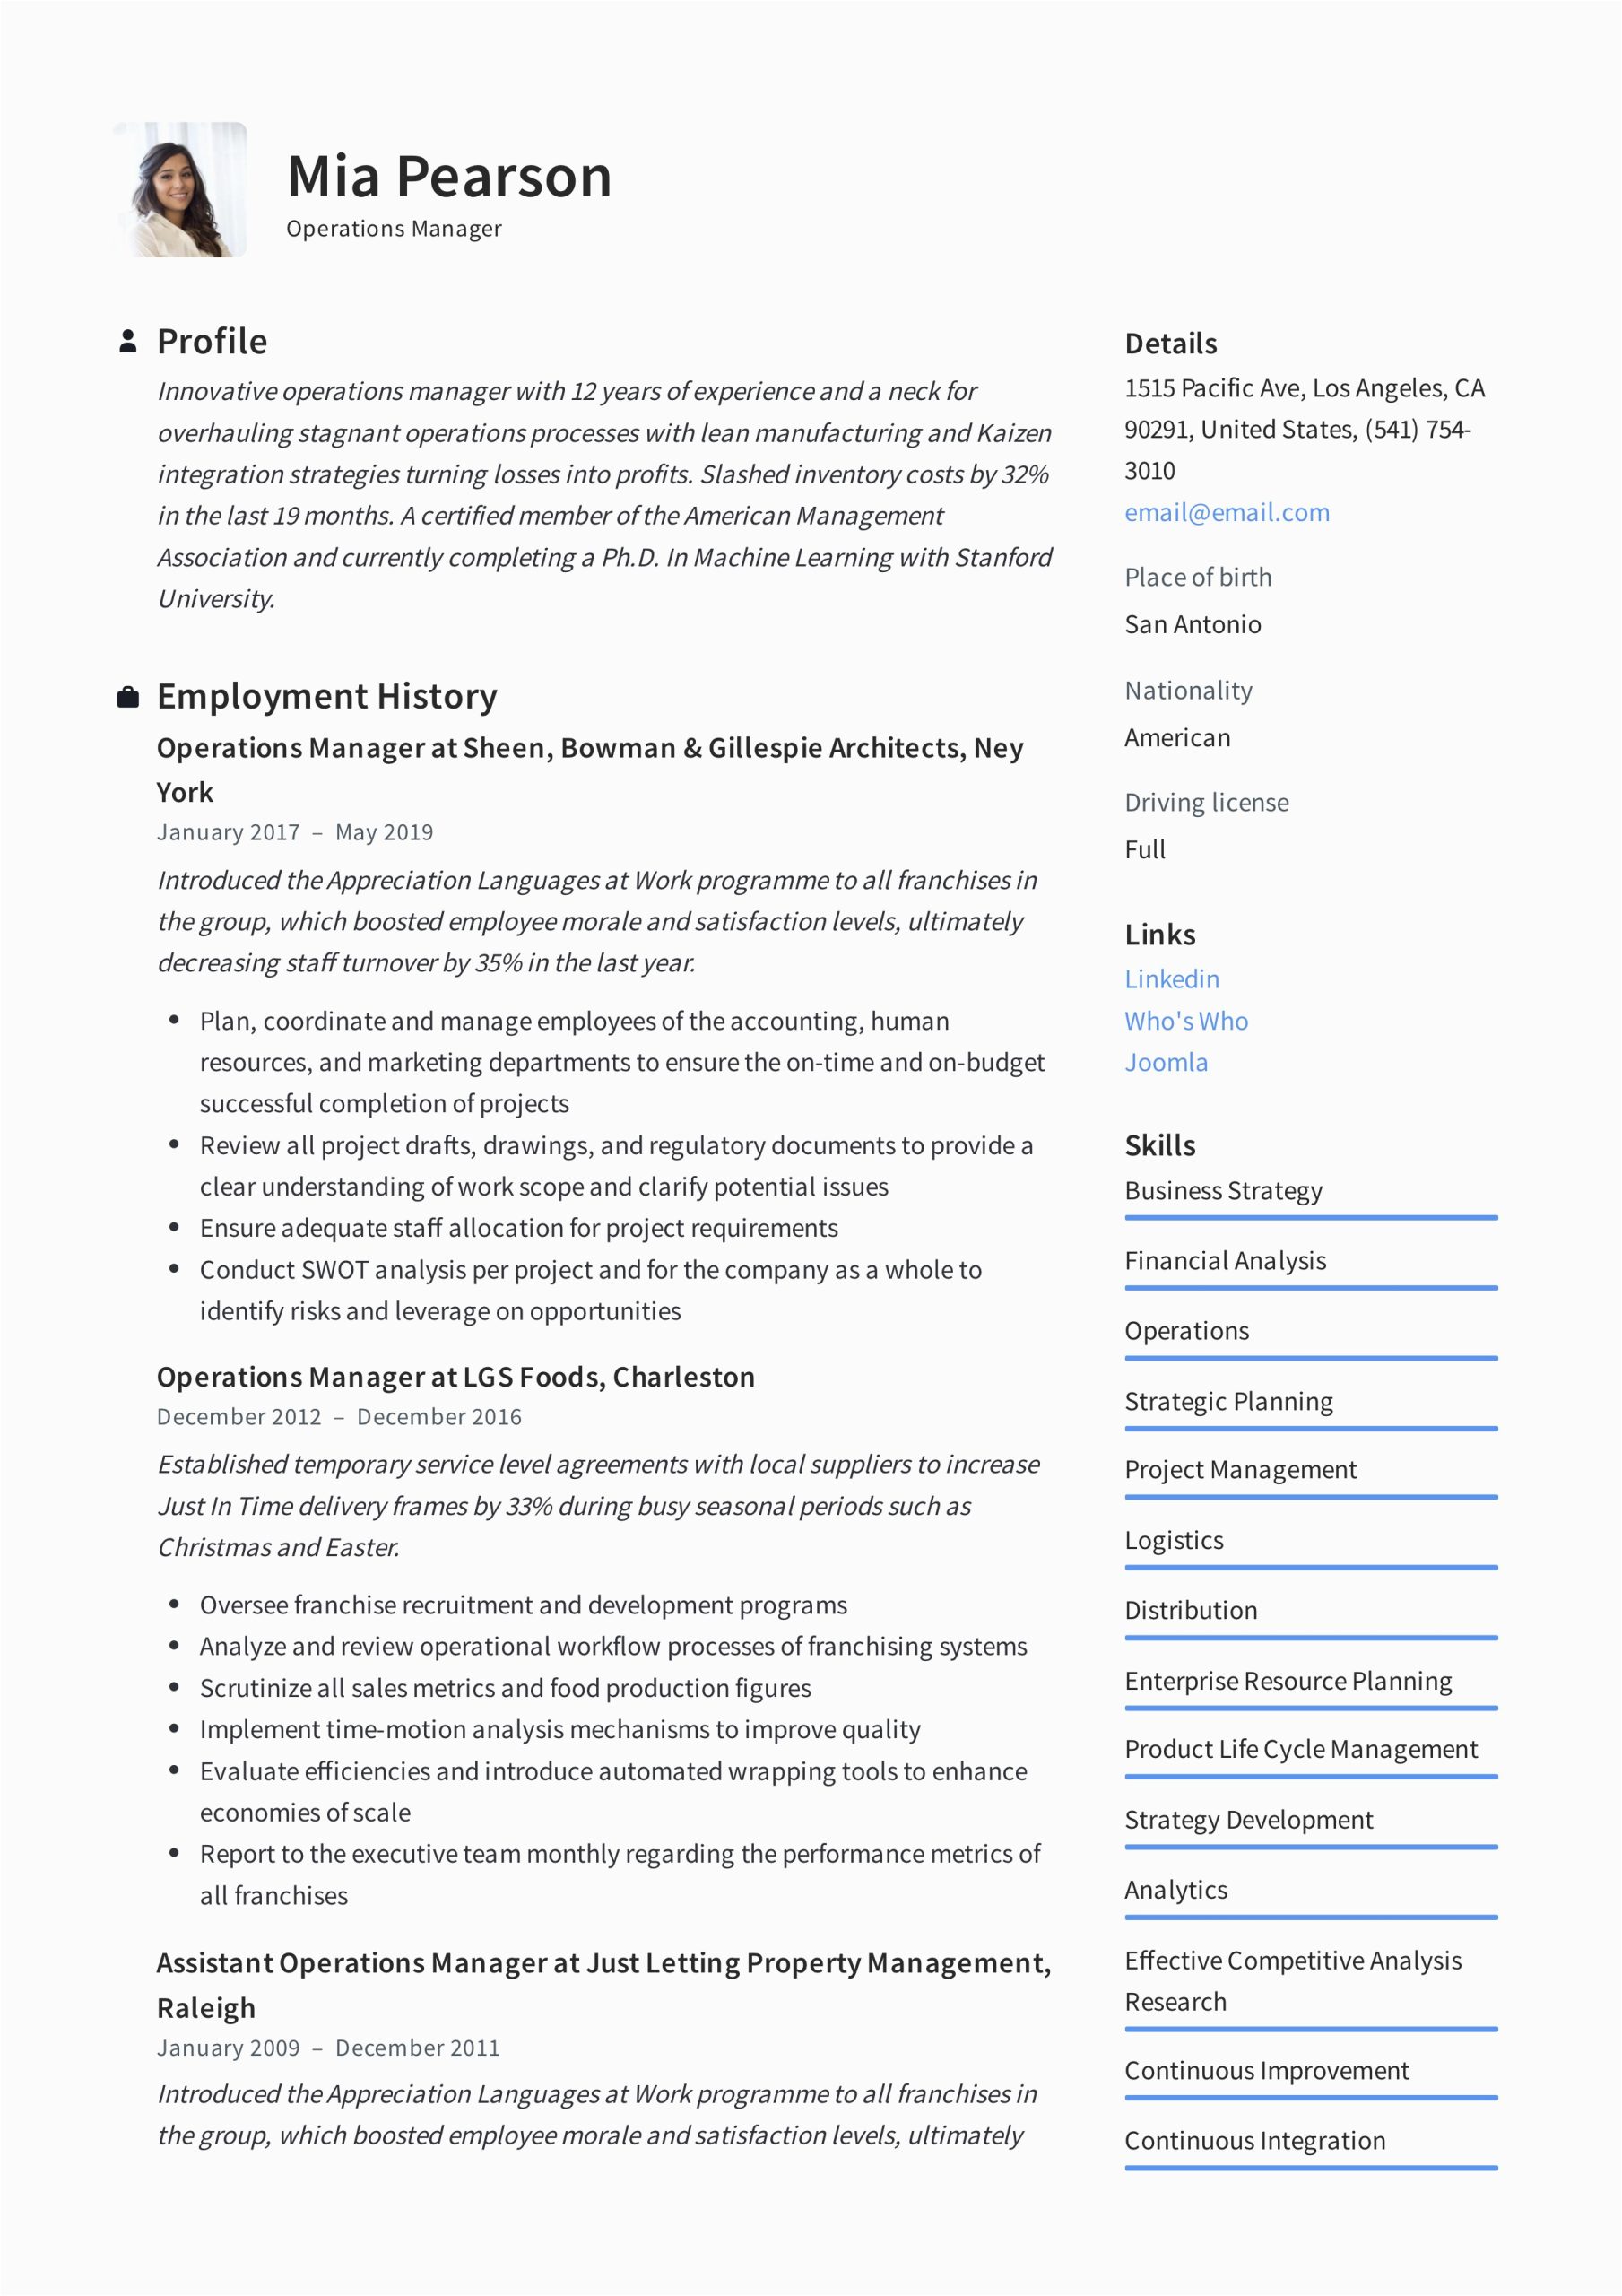 Sample Resume format for Operations Manager Operations Manager Resume & Writing Guide 12 Examples